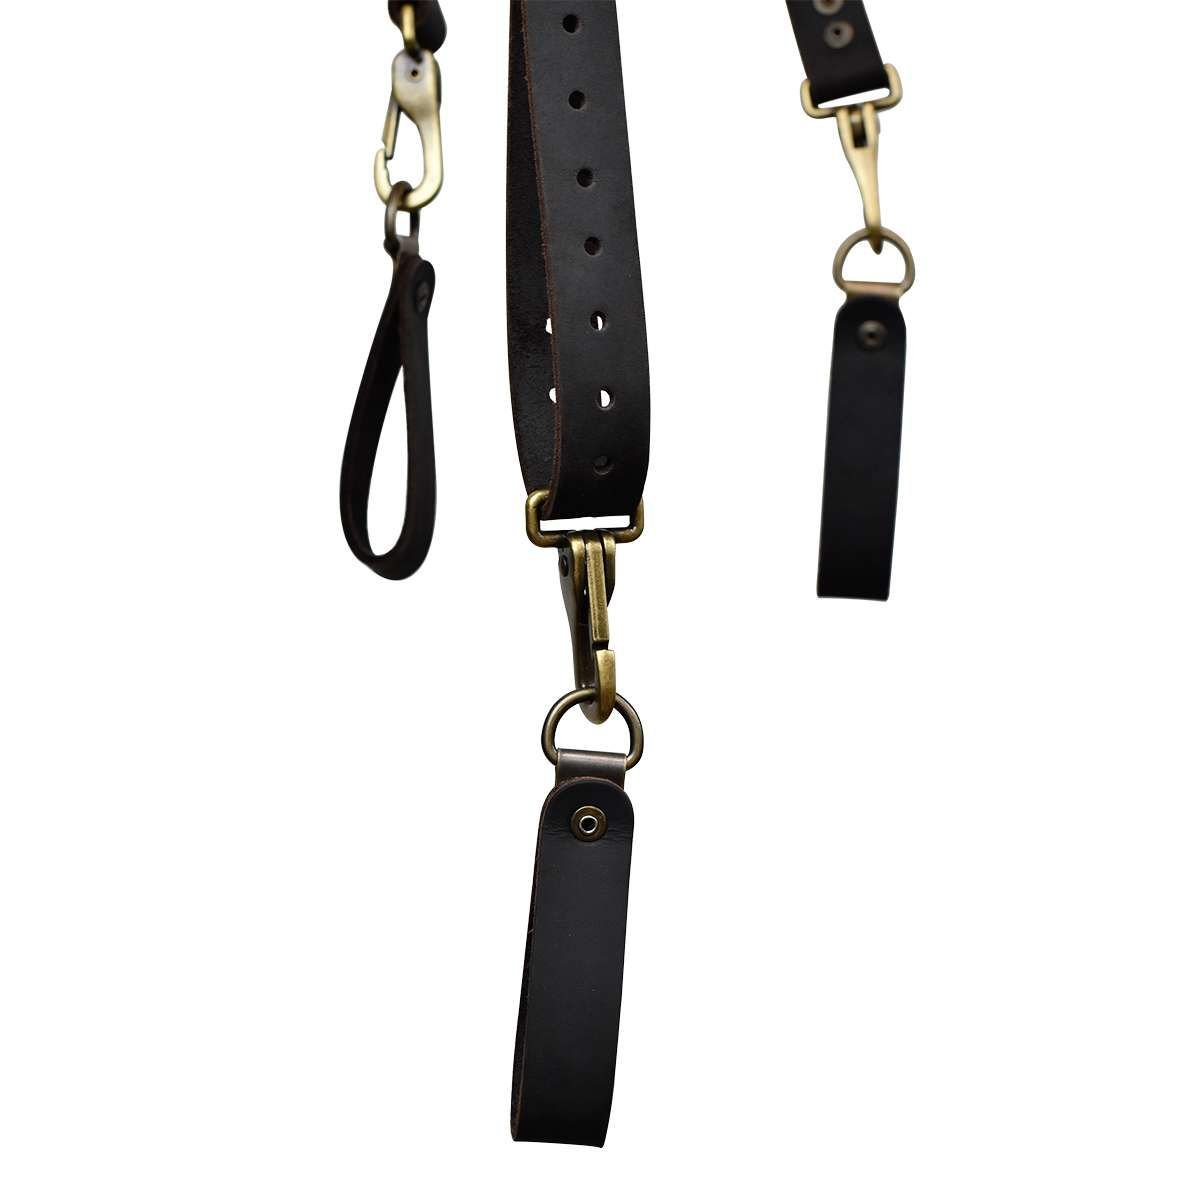 OX-P263501 - OX PRO OIL TANNED SUSPENDERS